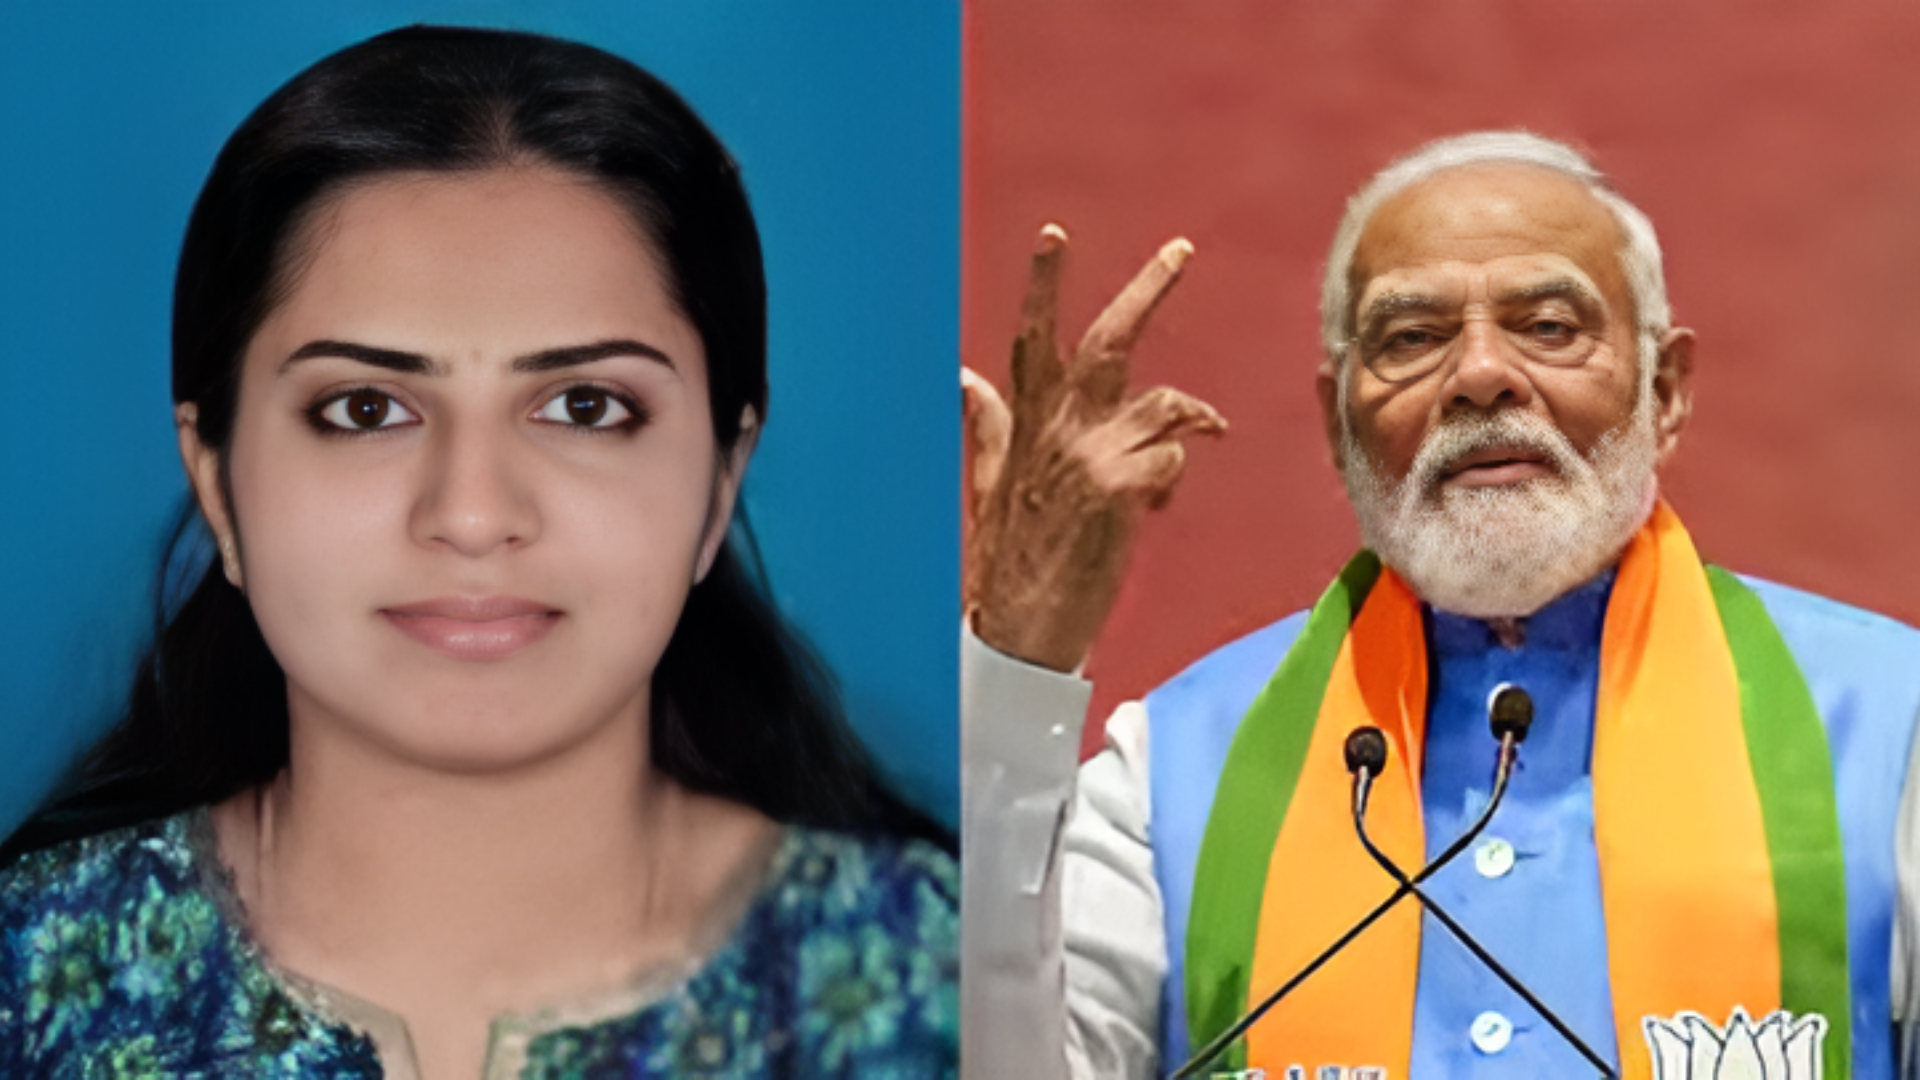 Southern Railway’s Loco Pilot Aiswarya S Menon Among Special Guests at PM Modi’s Swearing-In Ceremony On June 9